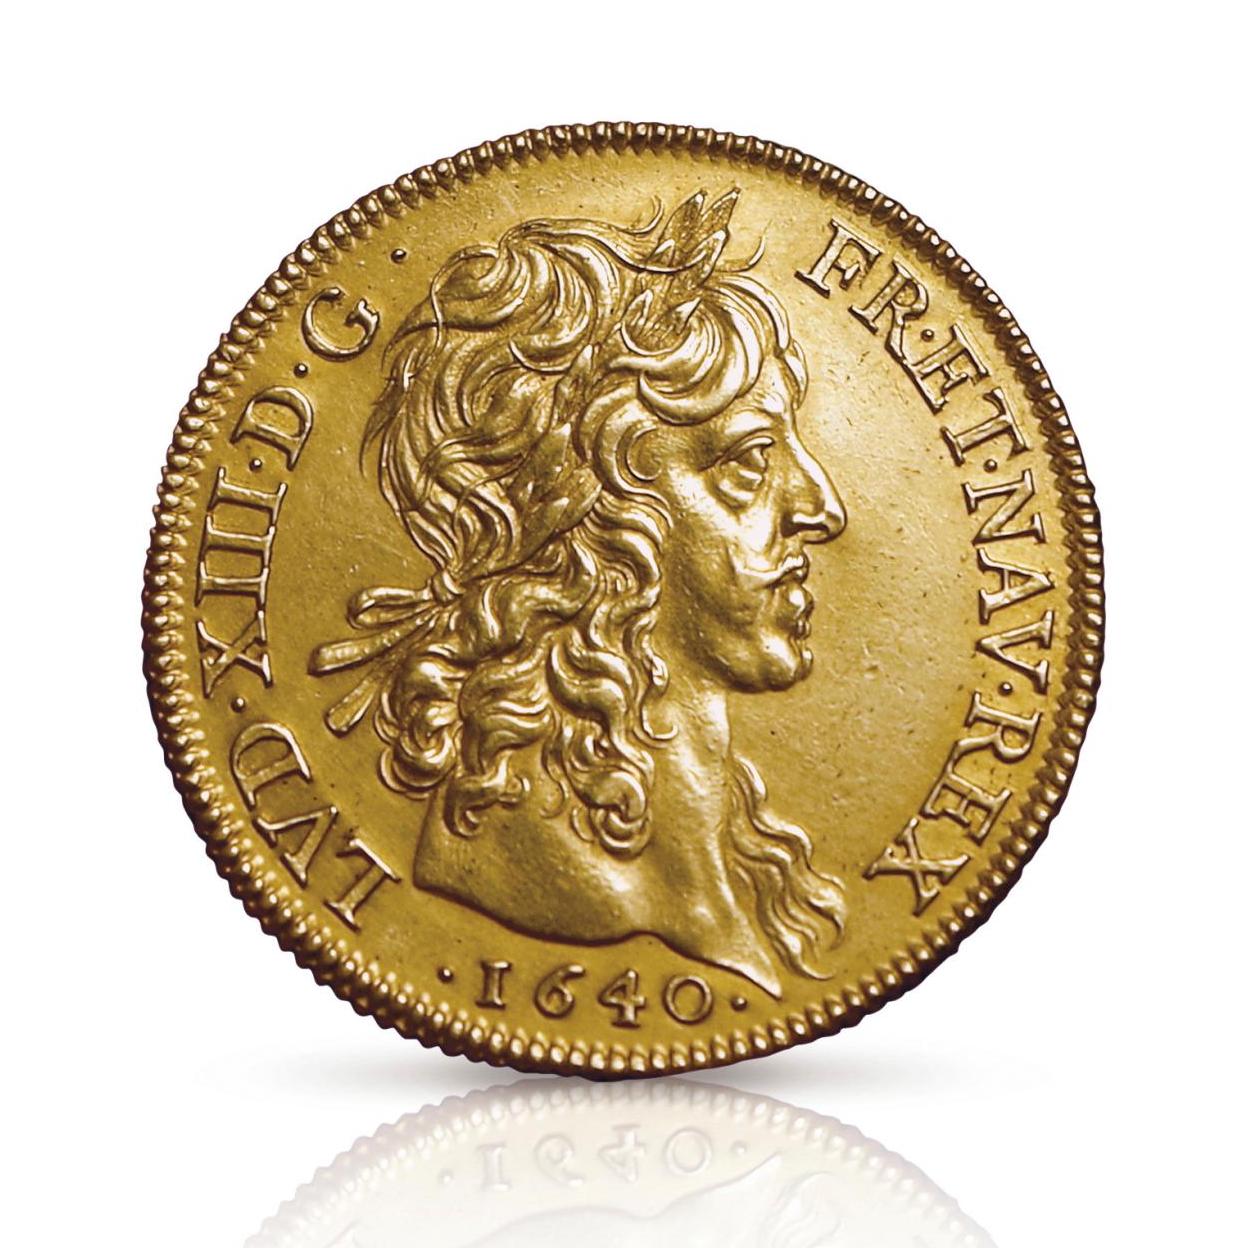  Triumph for a Rare Louis XIII Coin - Lots sold